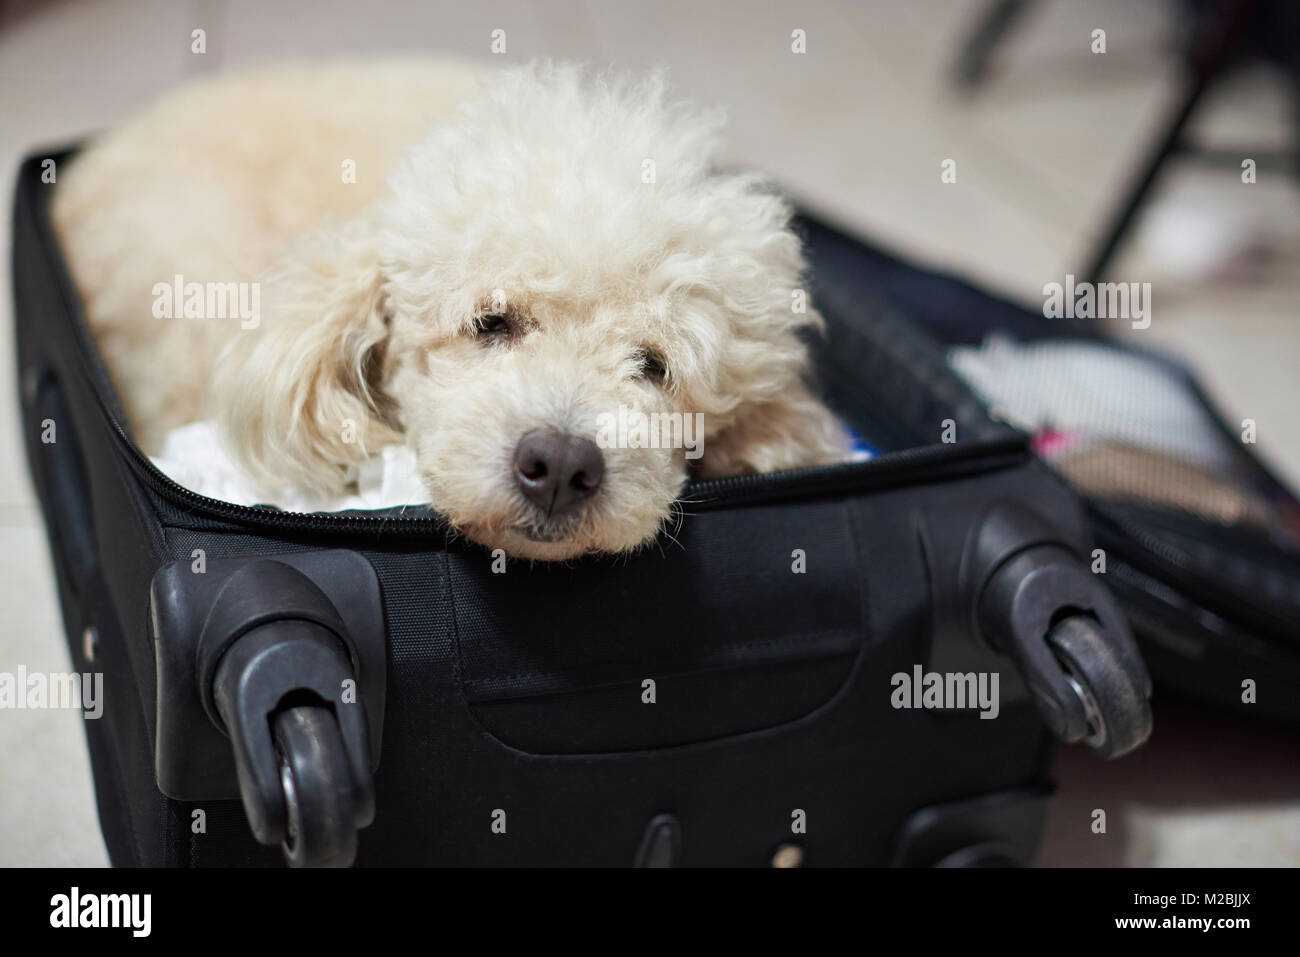 Sleeping poodle dog in suitcase waiting for travel Stock Photo